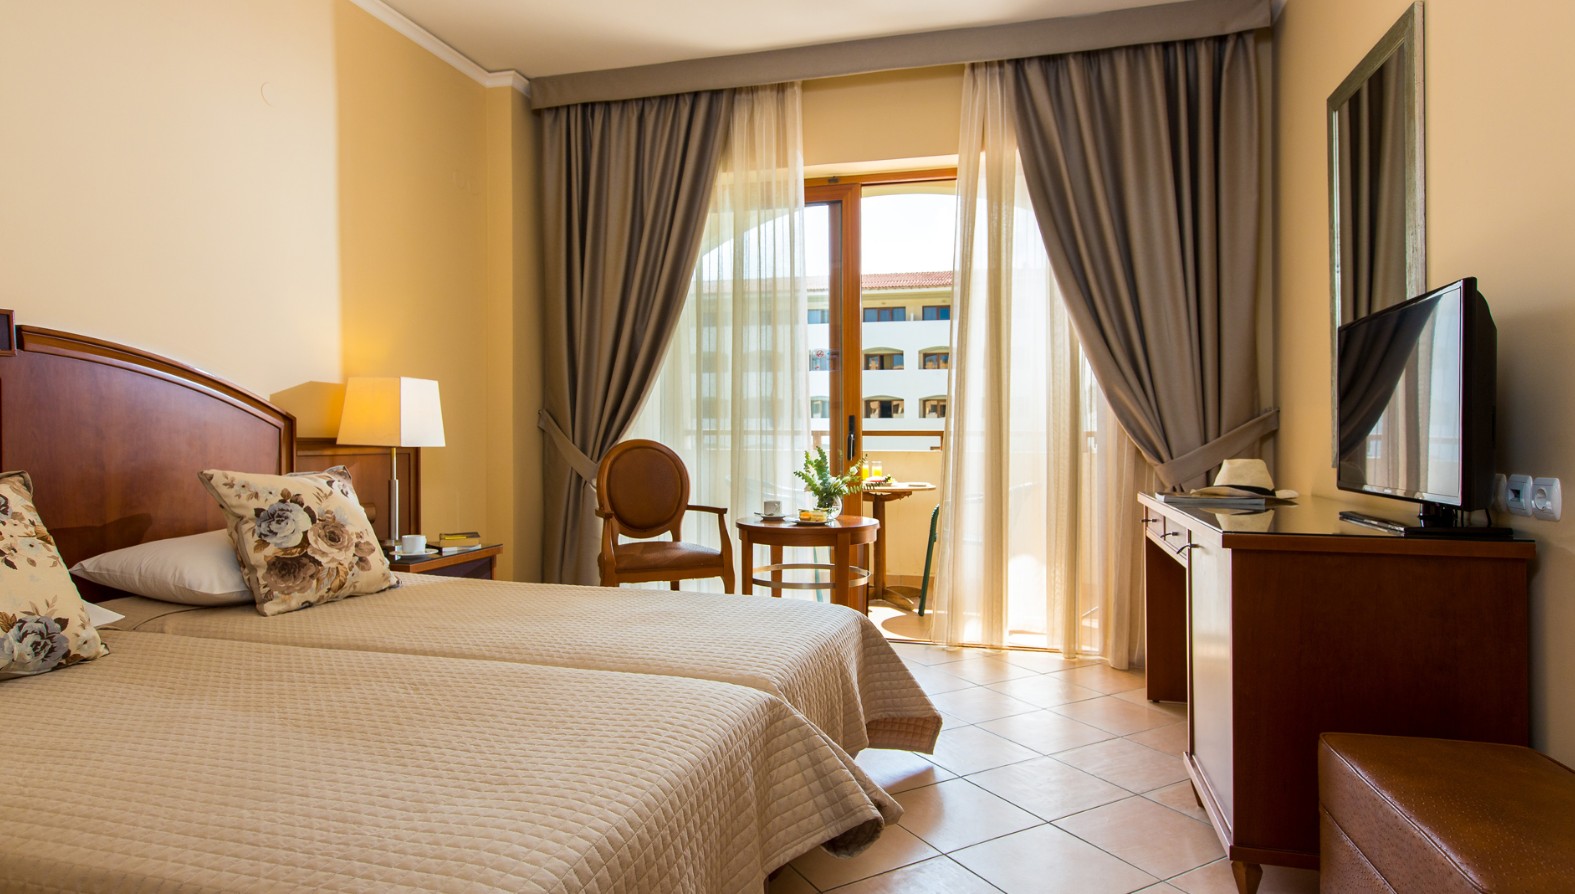 Double Room, Theartemis Palace 4*